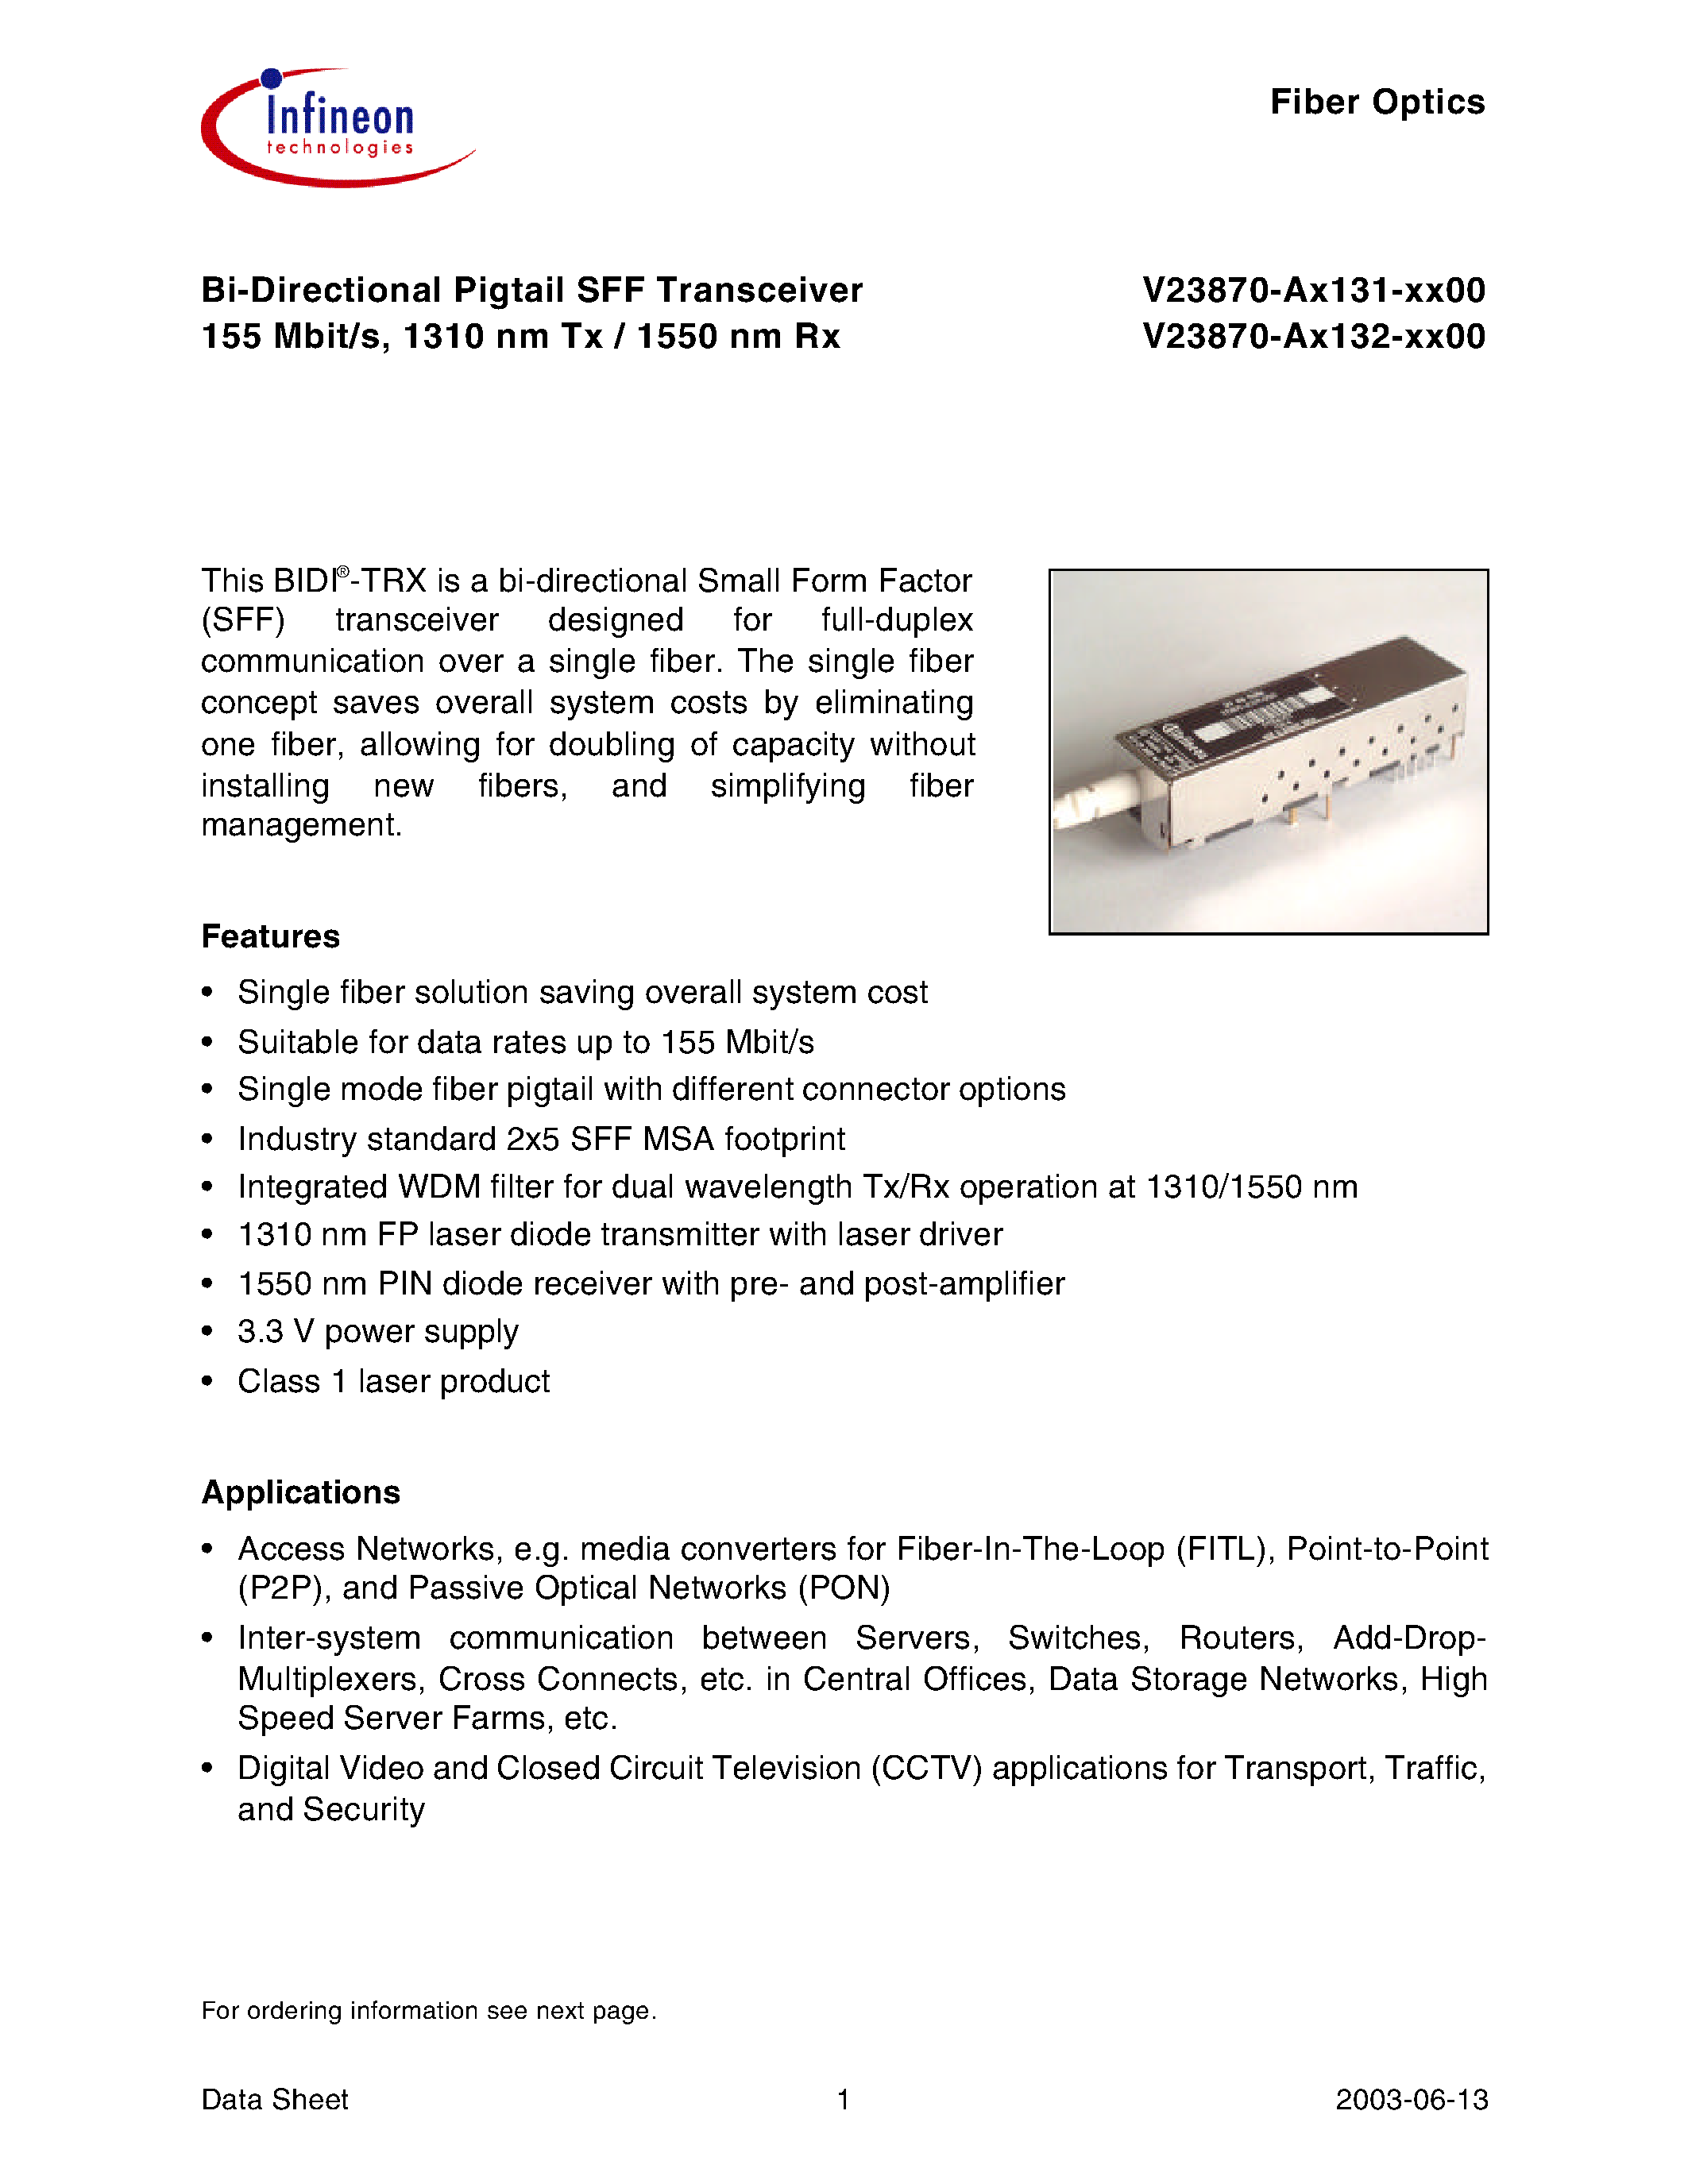 Datasheet V23870-A1131-A200 - Bi-Directional Pigtail SFF Transceiver 155 Mbit/s/ 1310 nm Tx / 1550 nm Rx page 1